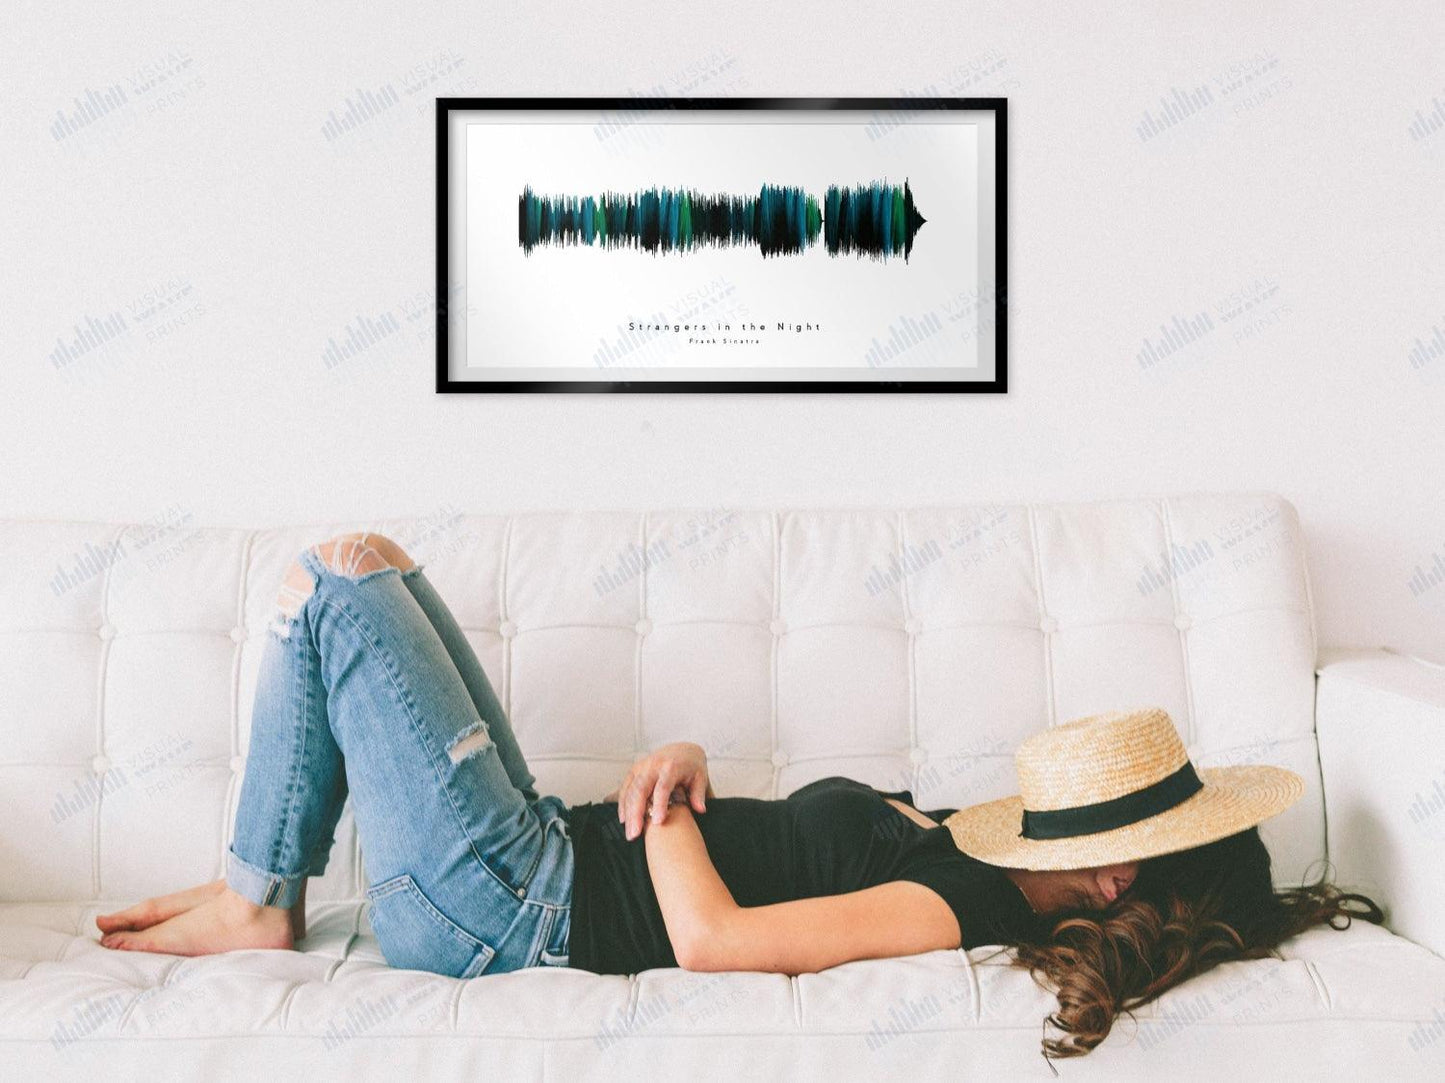 Strangers In the Night by Frank Sinatra - Visual Wave Prints